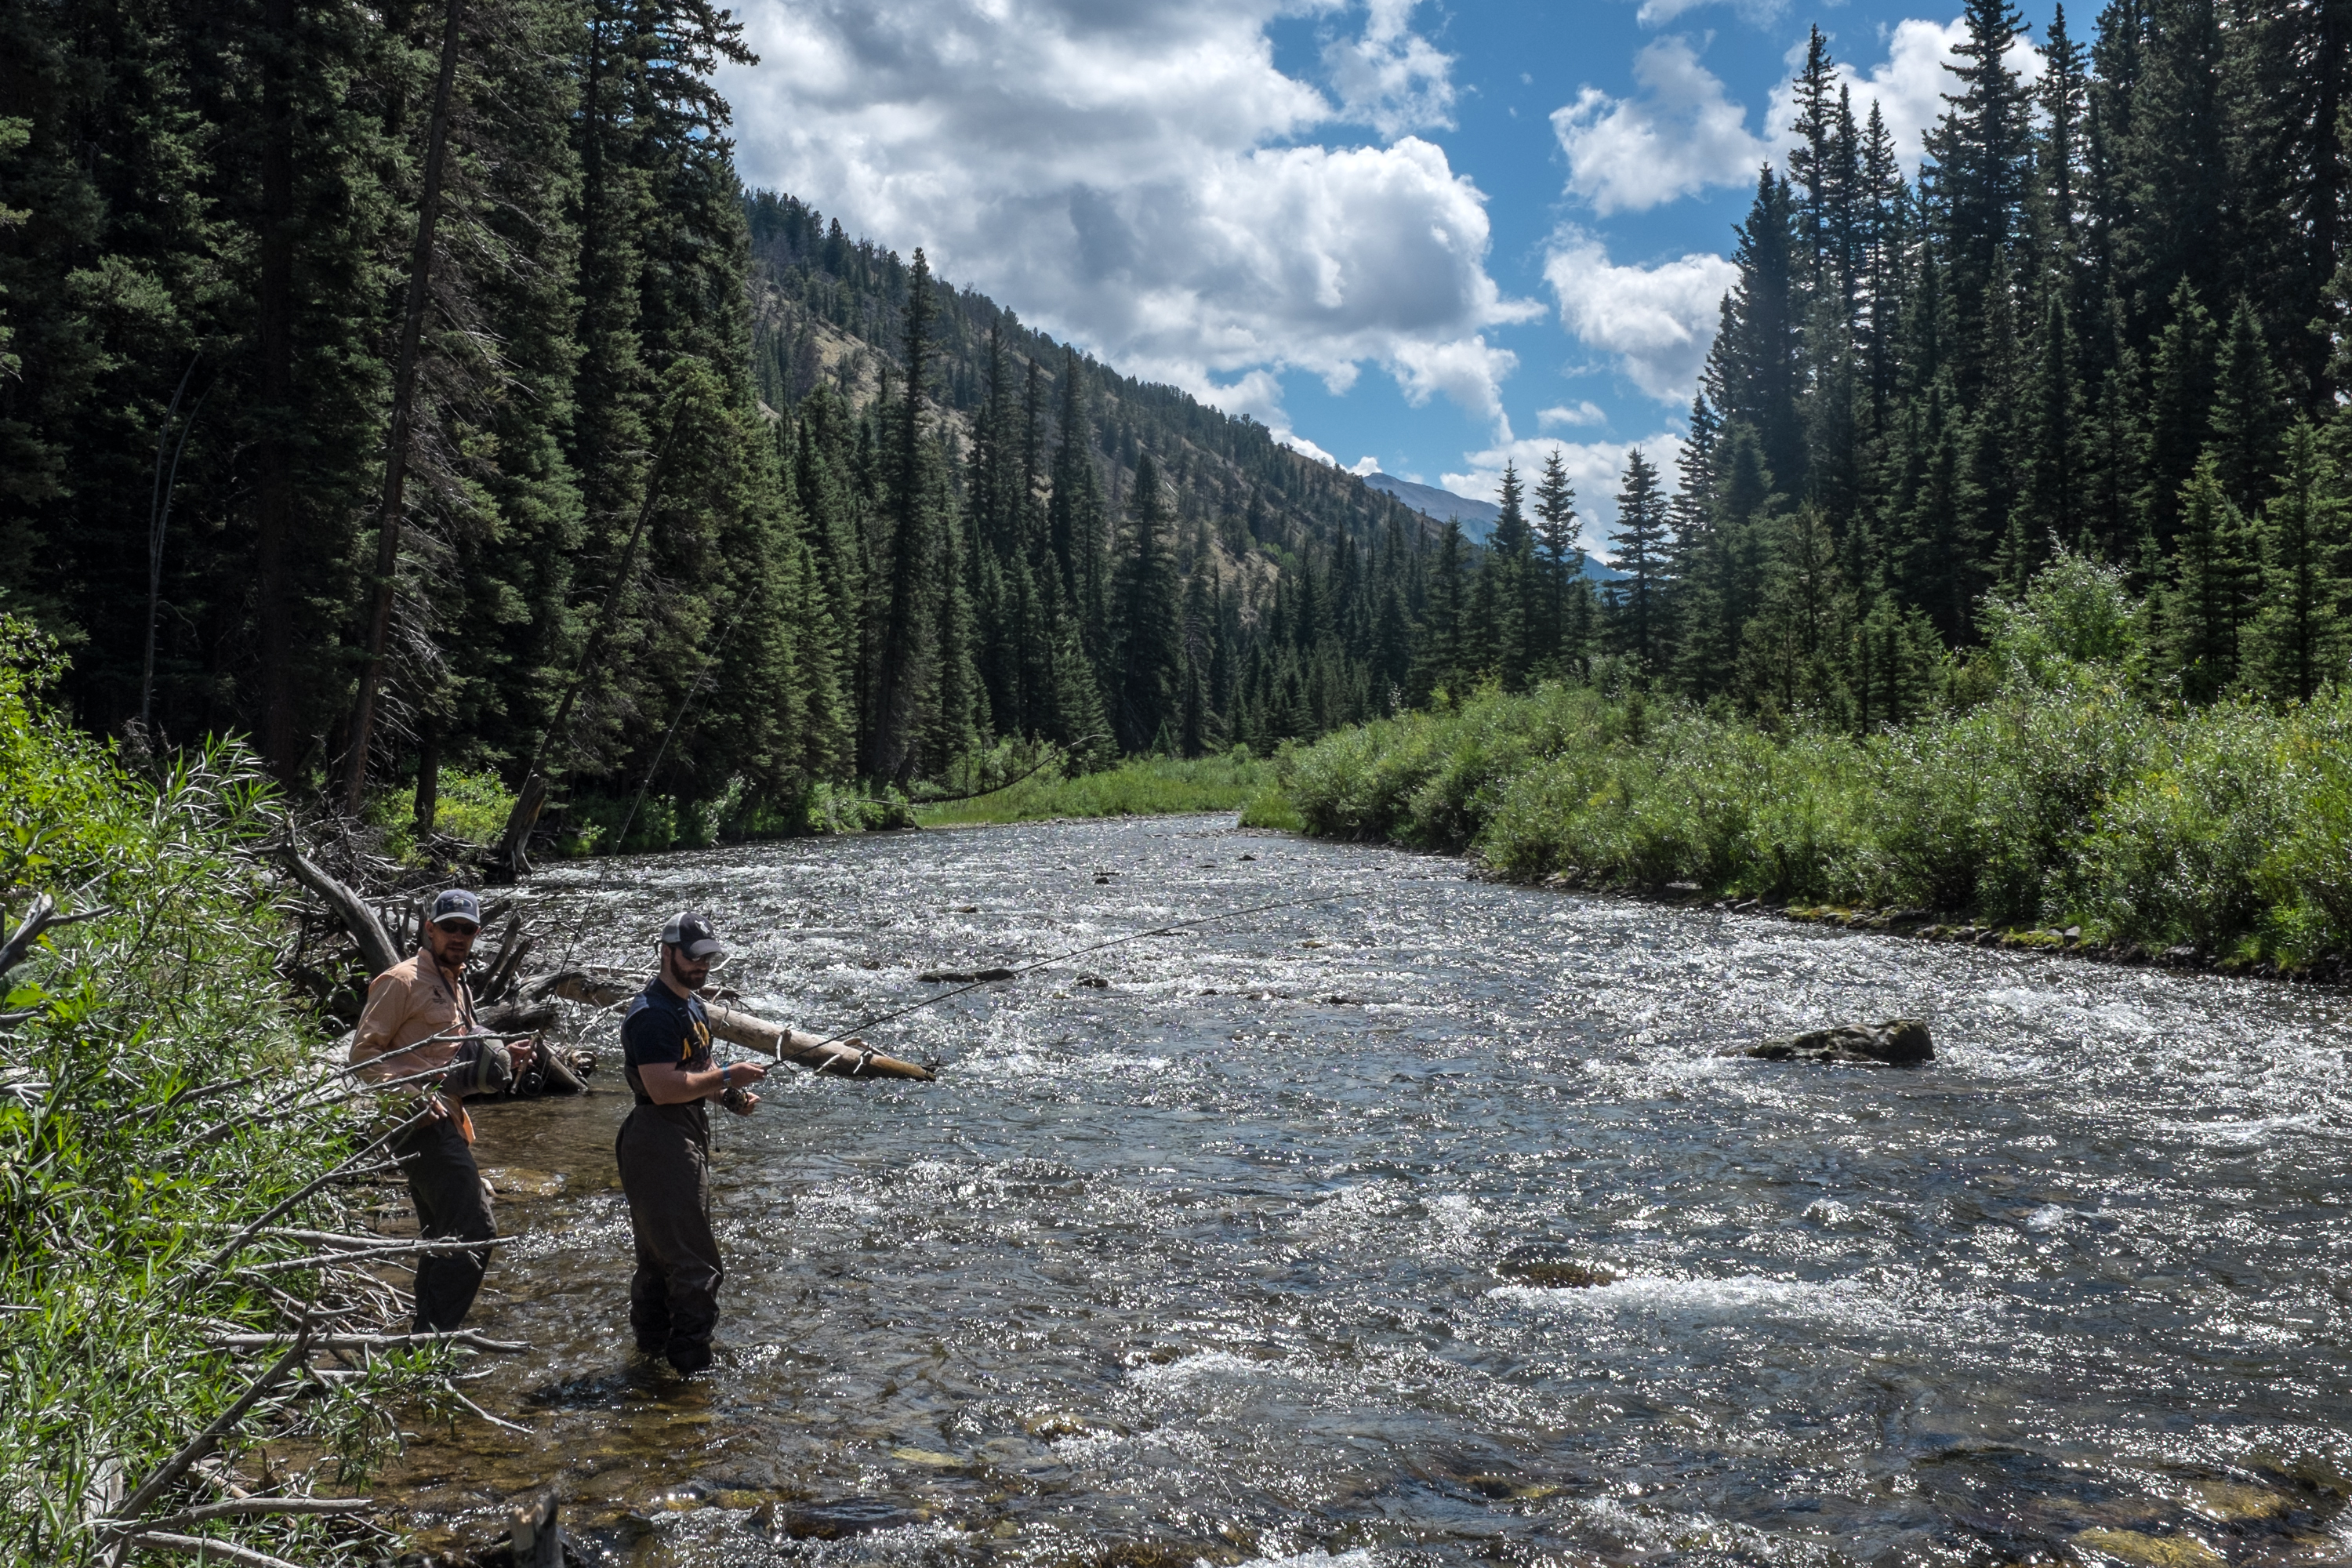 <em>The author's husband, Josh Peterson (left) helps Patrick Dorgan catch a Snake River cutthroat trout in the Greys River in western Wyoming.</em> By the time we crossed yet another mountain range, time was starting to slip. Snake River cutthroat trout would need to be kind to us, or we certainly wouldn’t make it in 24 hours. Fortunately, the Greys River offers an unparalleled 30 or so miles of fishable water, with a dirt road traveling its banks. Opportunities to catch a Snake River were endless. Ryan, Josh, and I caught ours, but Patrick Dorgan, who caught the first two, would ultimately bow out of the quest.